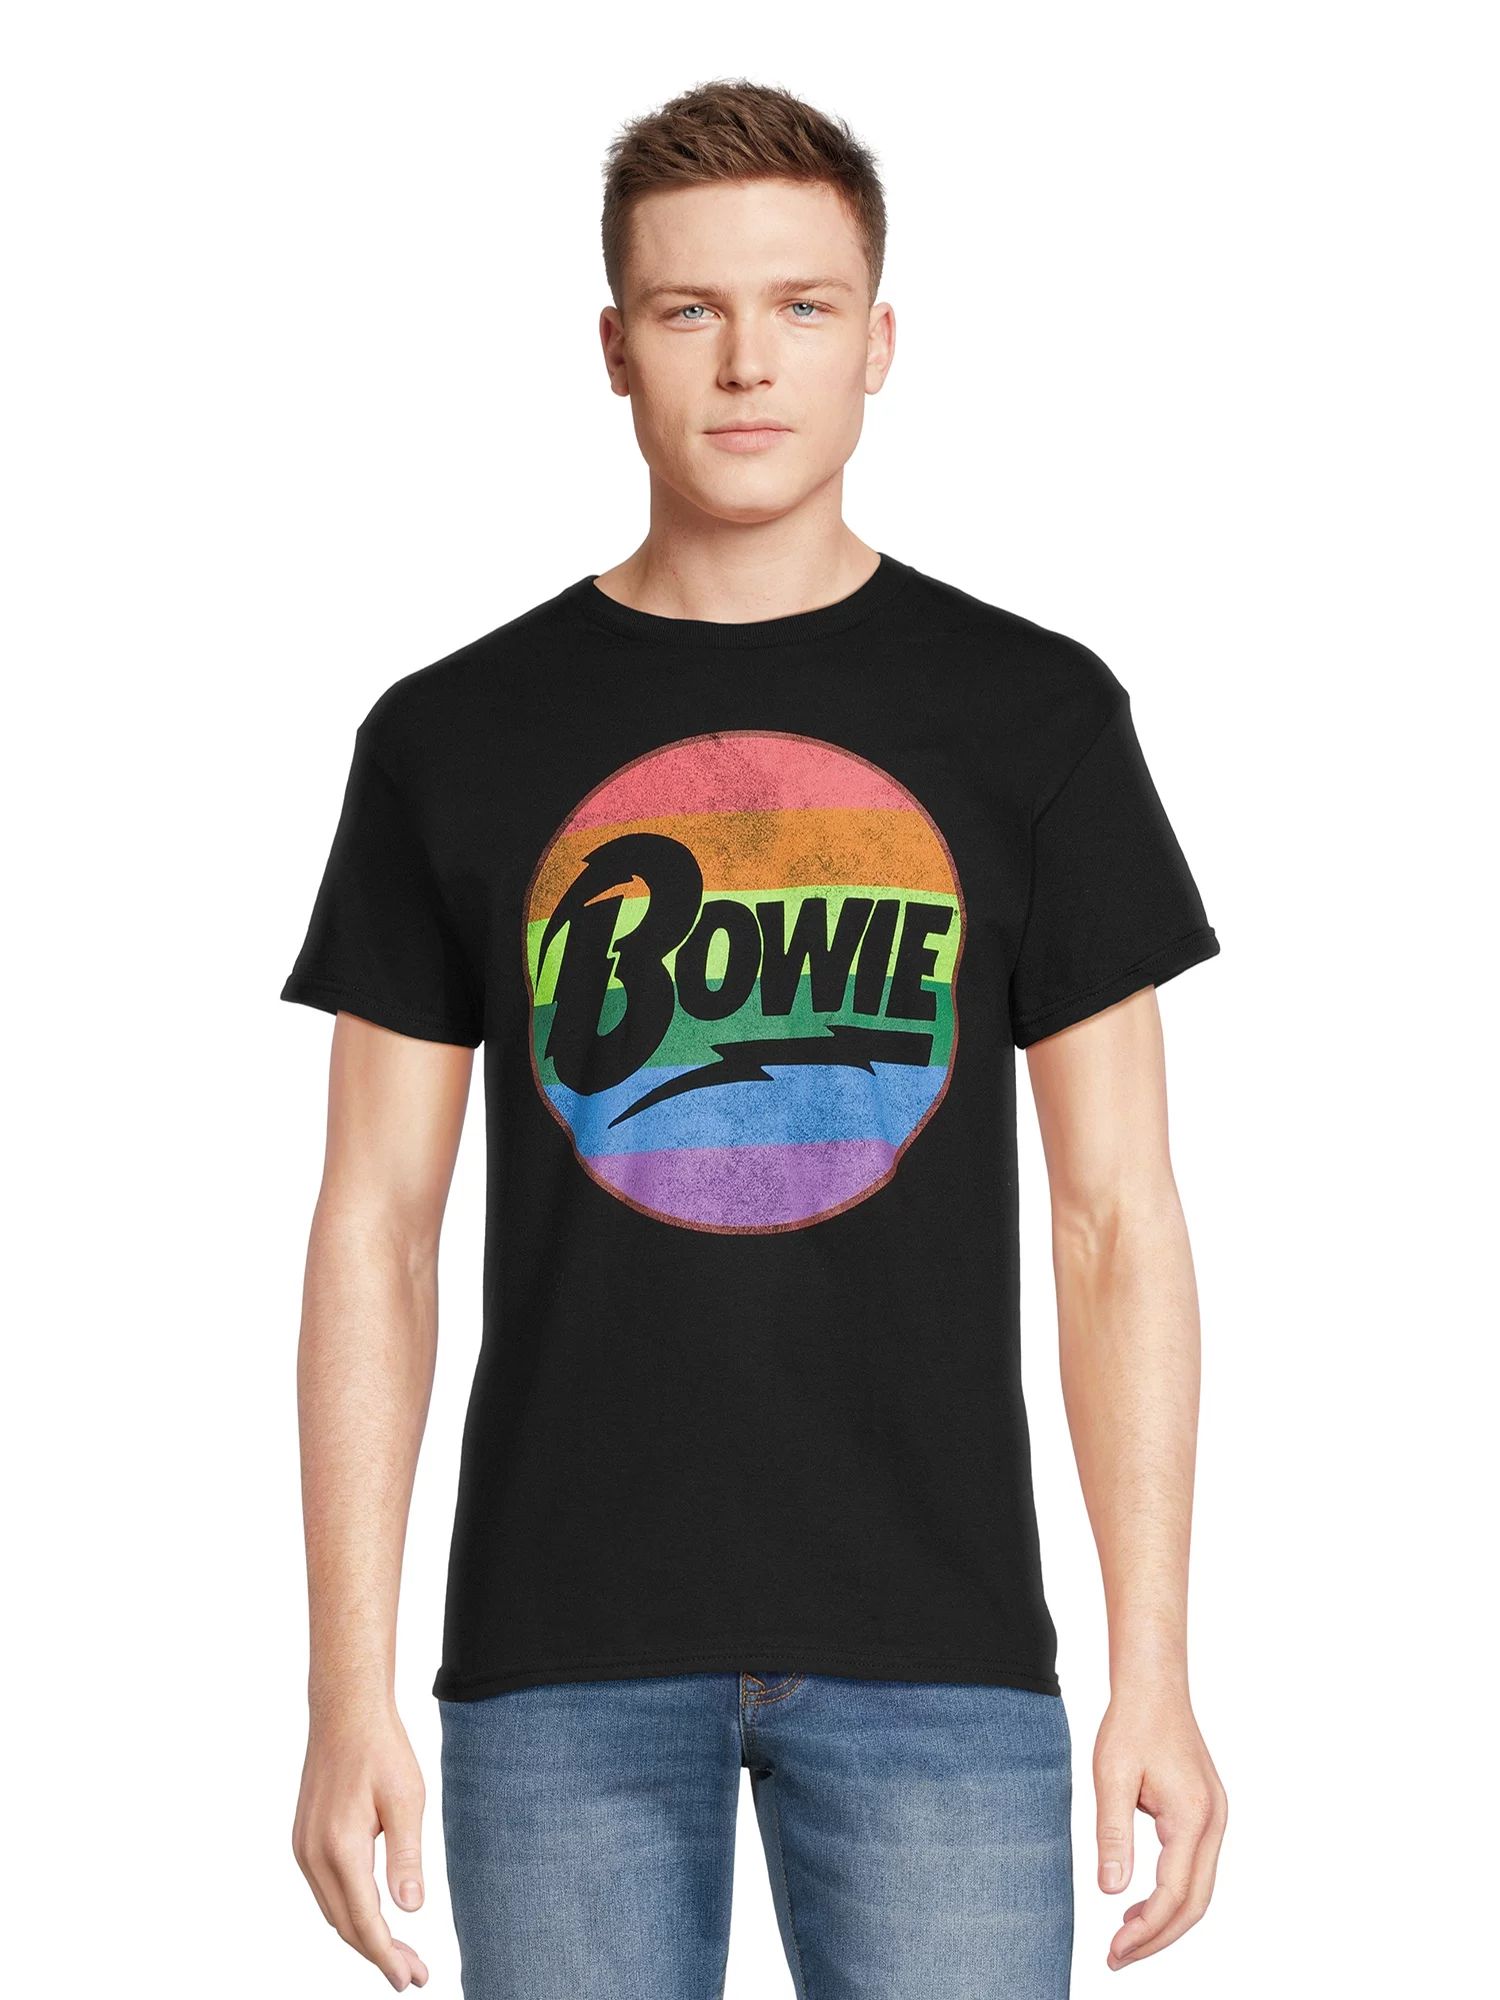 Bowie Men’s Graphic Tee with Short Sleeves, Sizes S-3XL | Walmart (US)